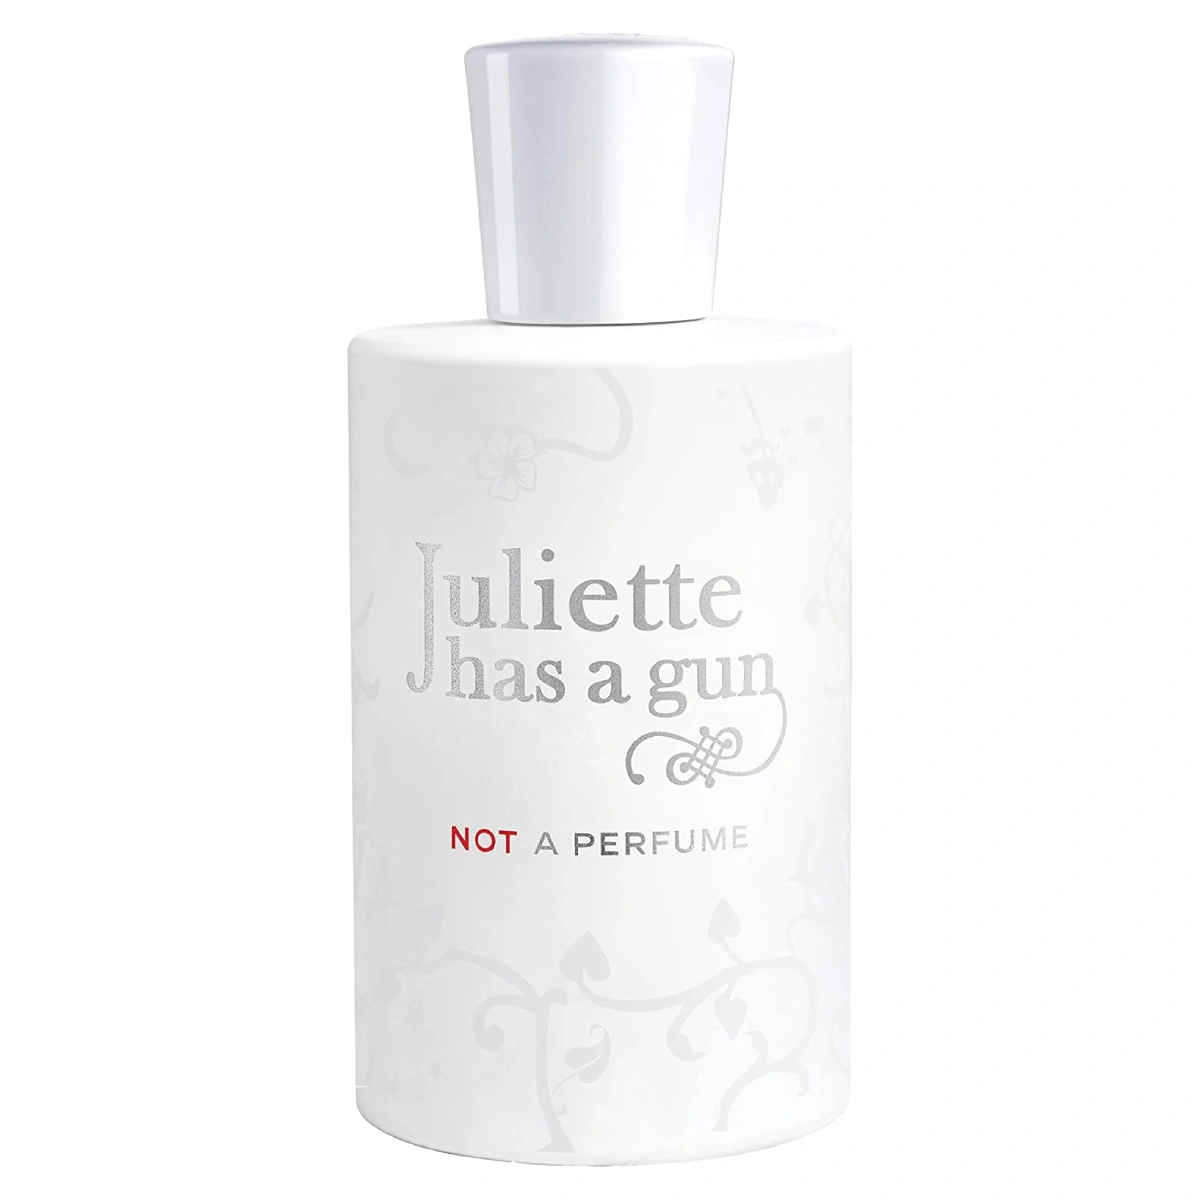 A bottle of Juliette Has a Gun 'Not a Perfume' displayed against a white background